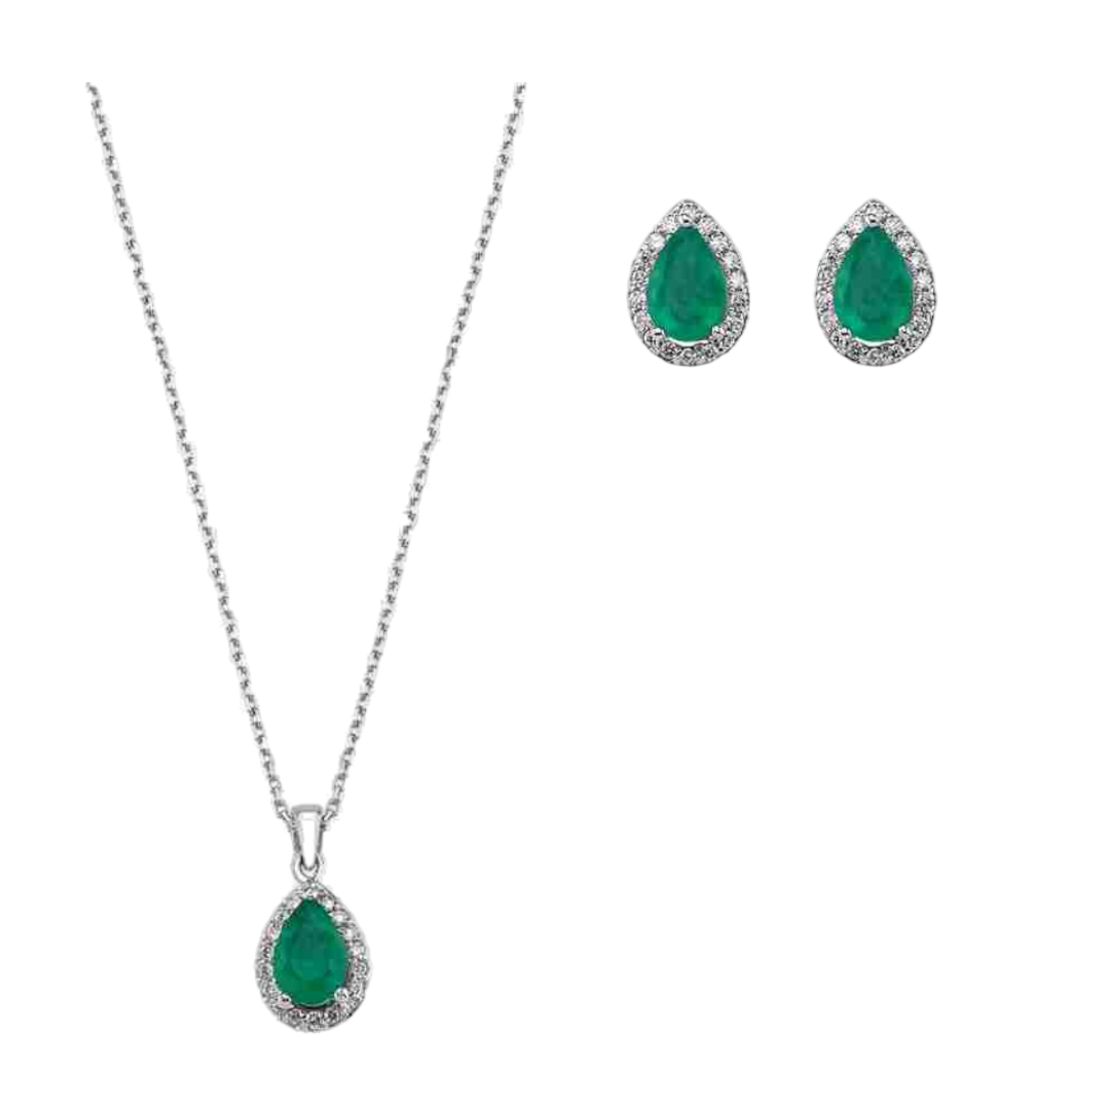 1.24 ct Set with emeralds and diamonds